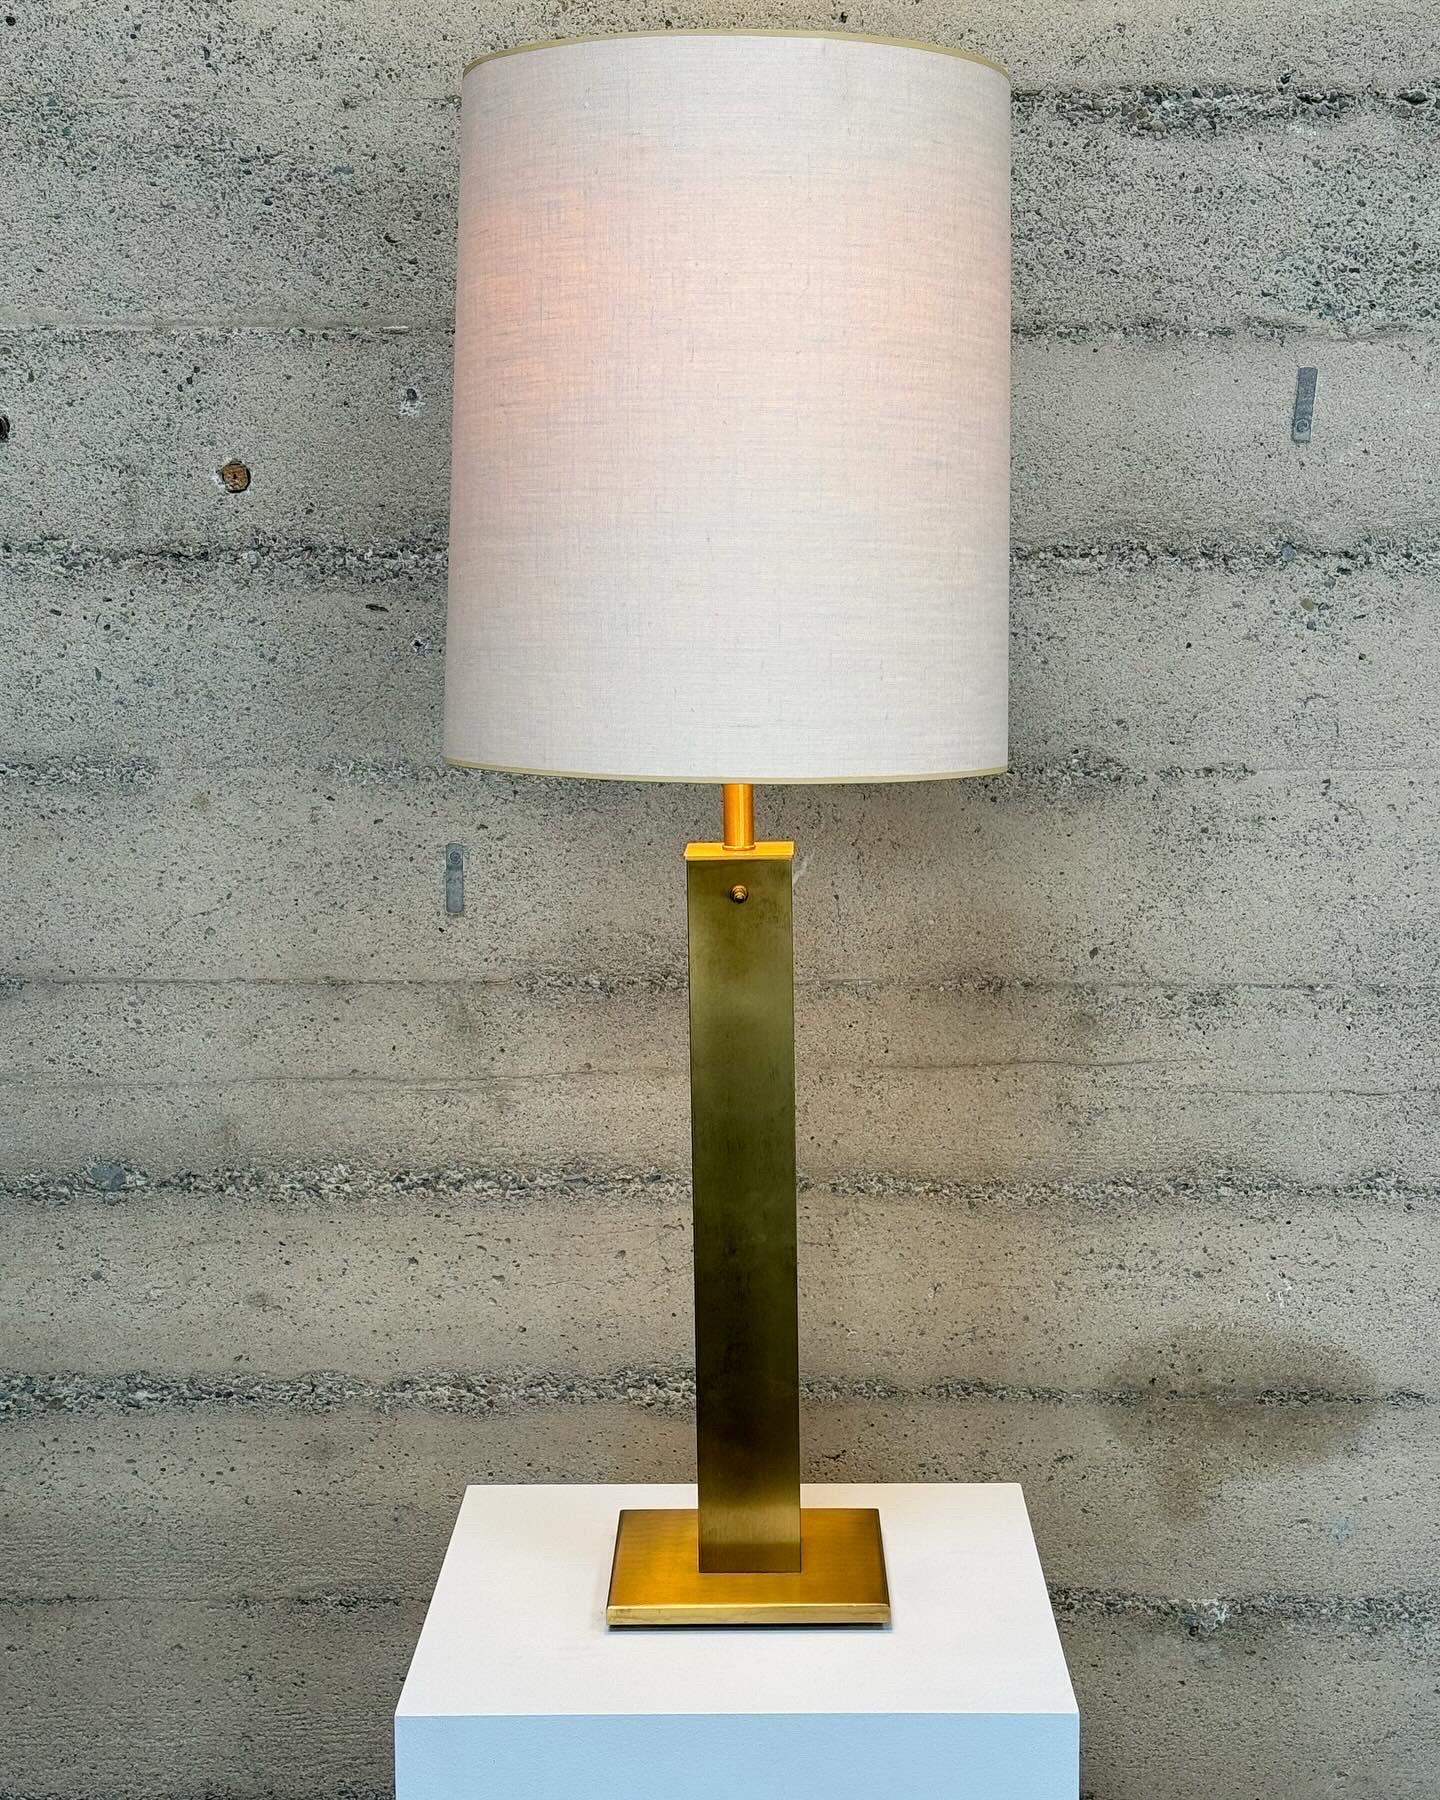 1960s Nessen Studios tall table lamp designed by Greta Von Nessen, constructed of brass, linen and glass. The body of the lamp is a tall square column with a square base, towards the top end is a rotary switch, a tubular stem and a glass diffuser